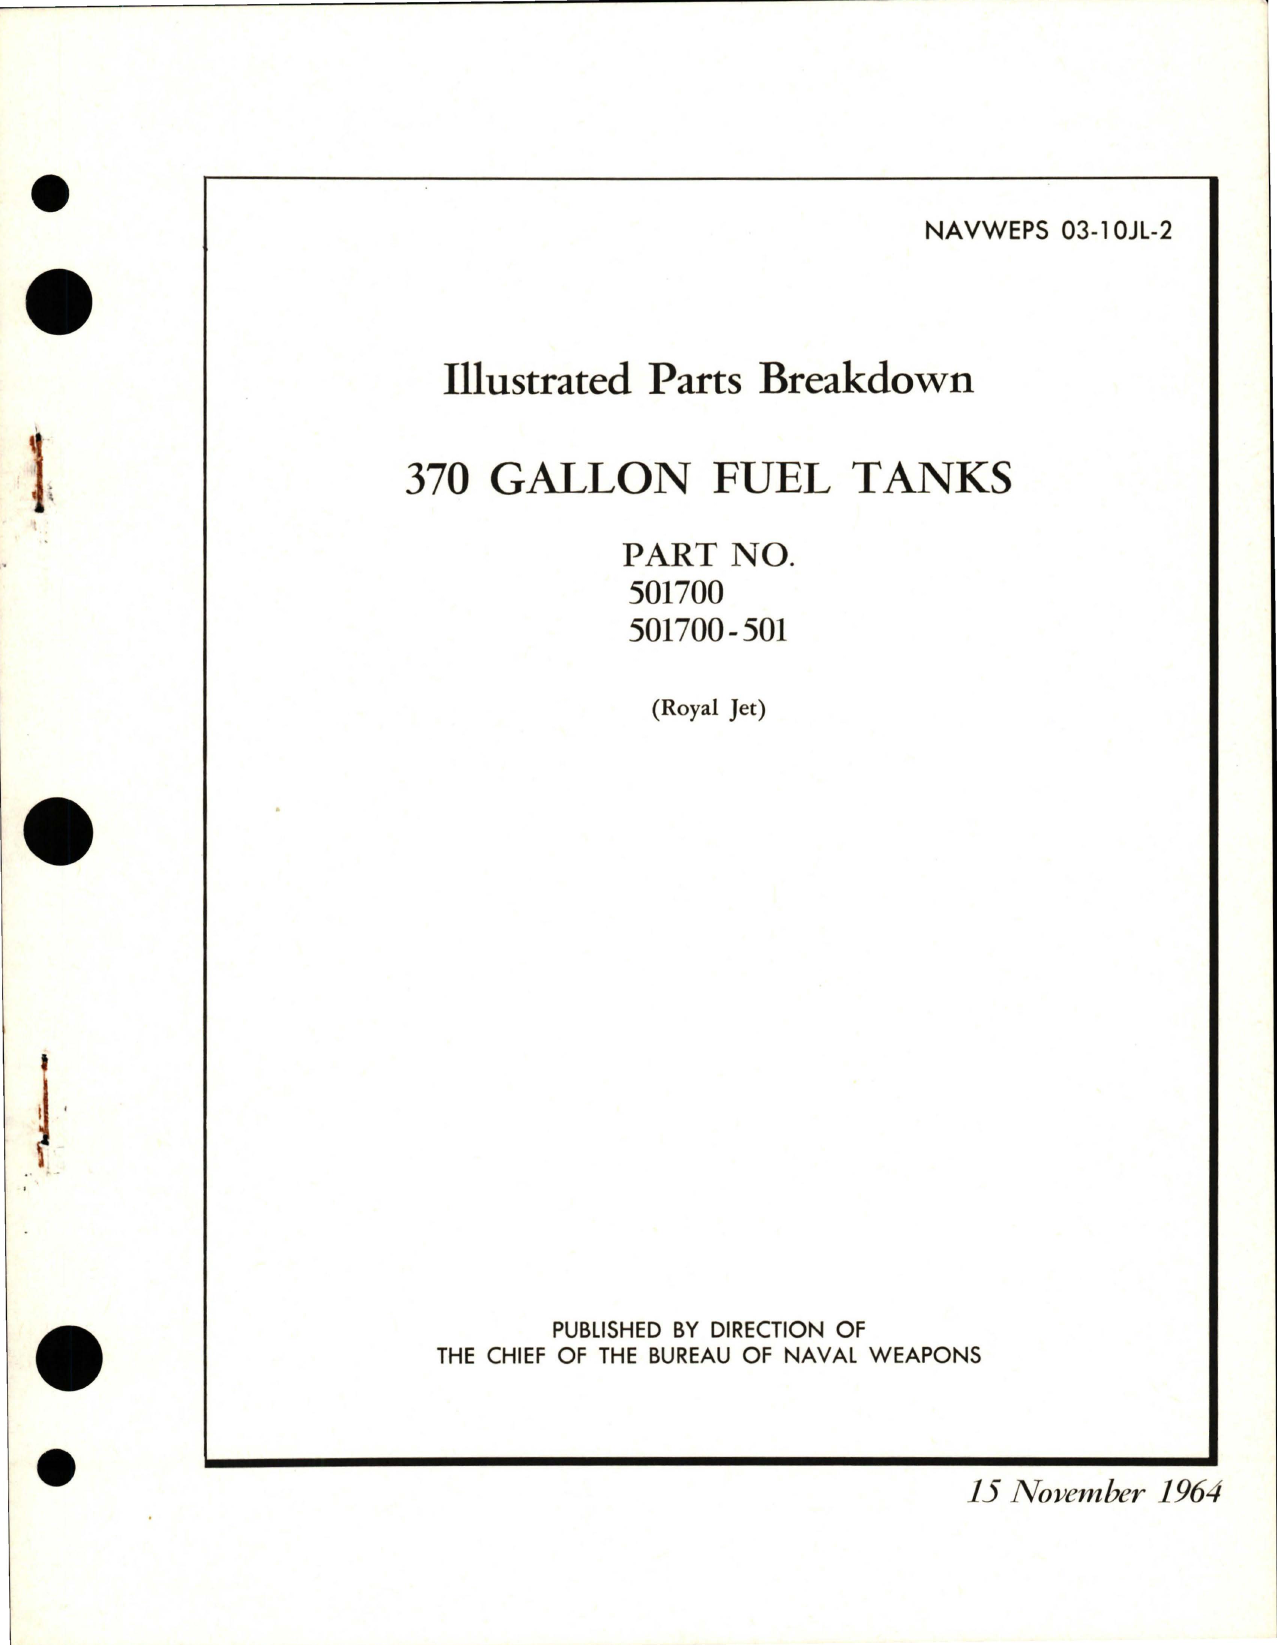 Sample page 1 from AirCorps Library document: Illustrated Parts Breakdown for 370 Gallon Fuel Tank - Parts 501700 and 501700-501